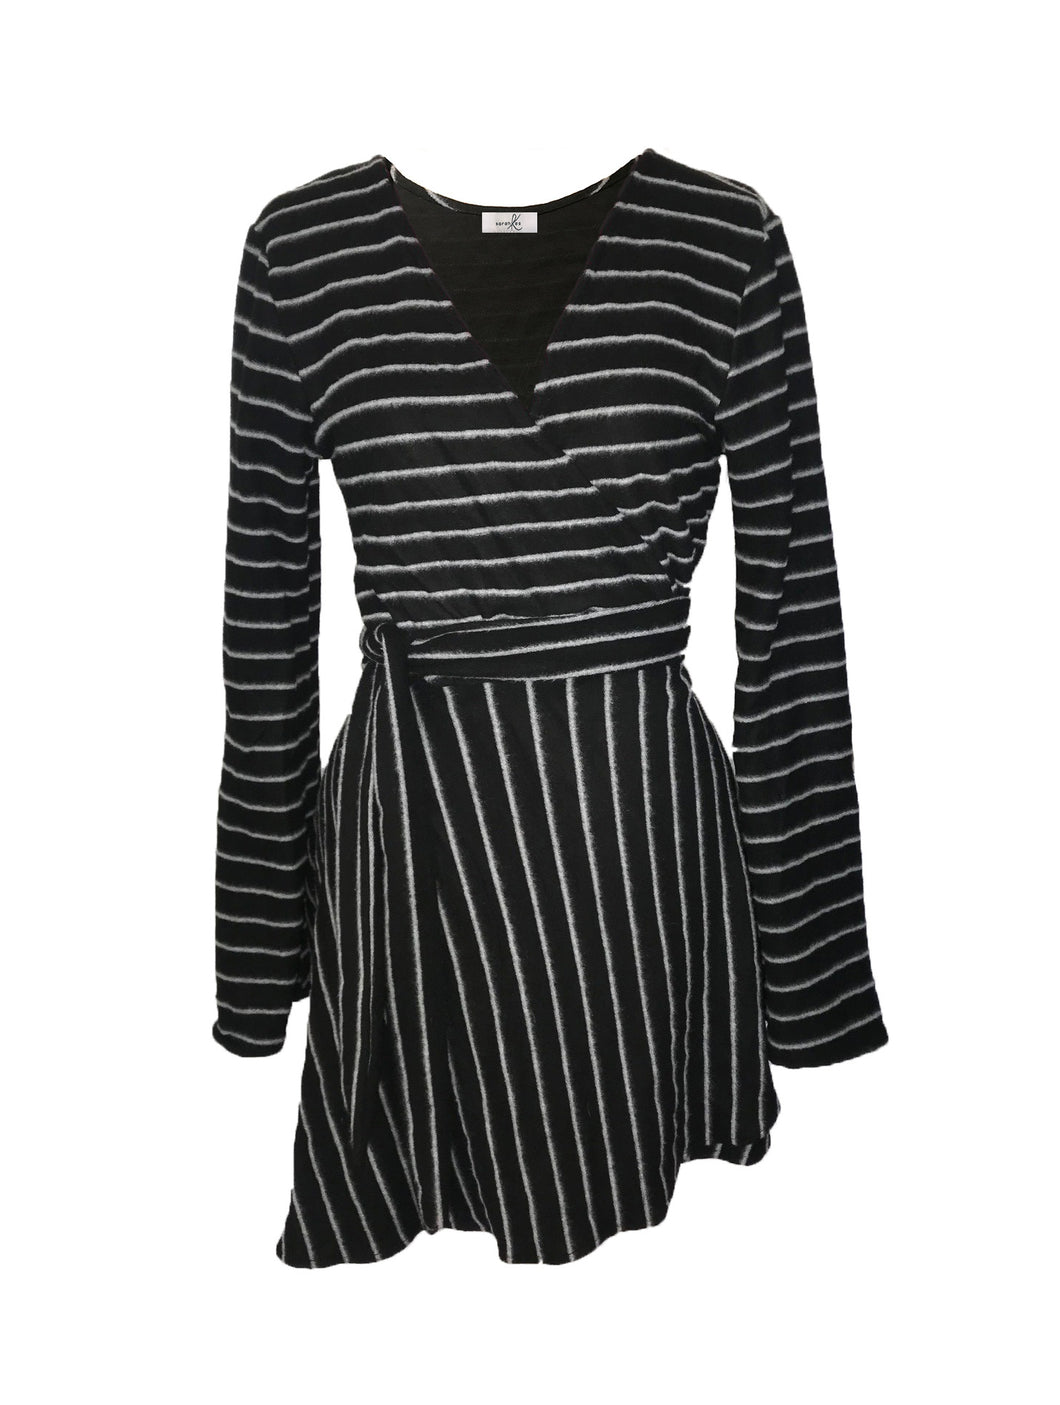 Black and white striped sweater wrap dress